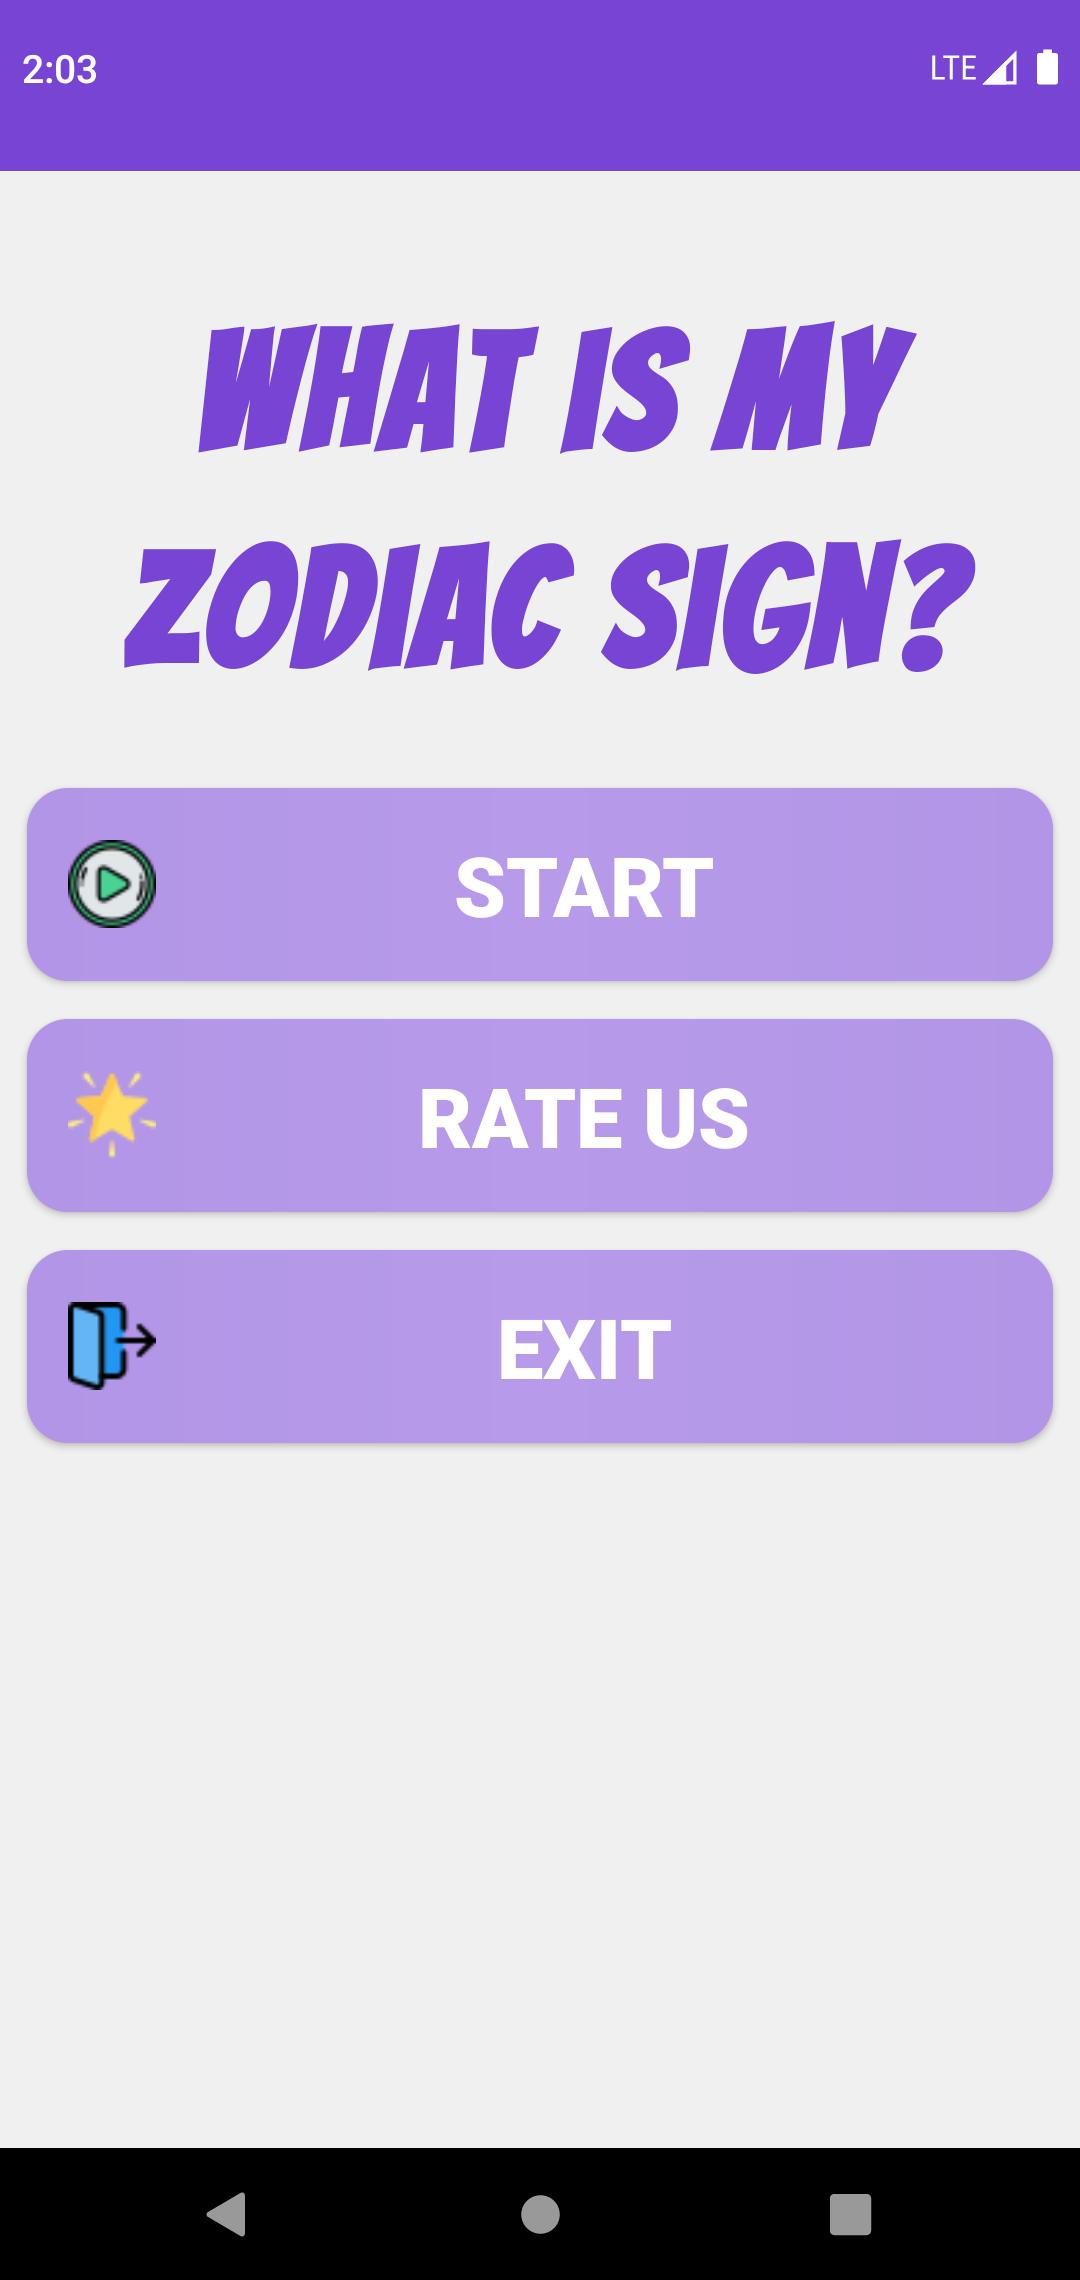 Is sign what my zodiac Born On